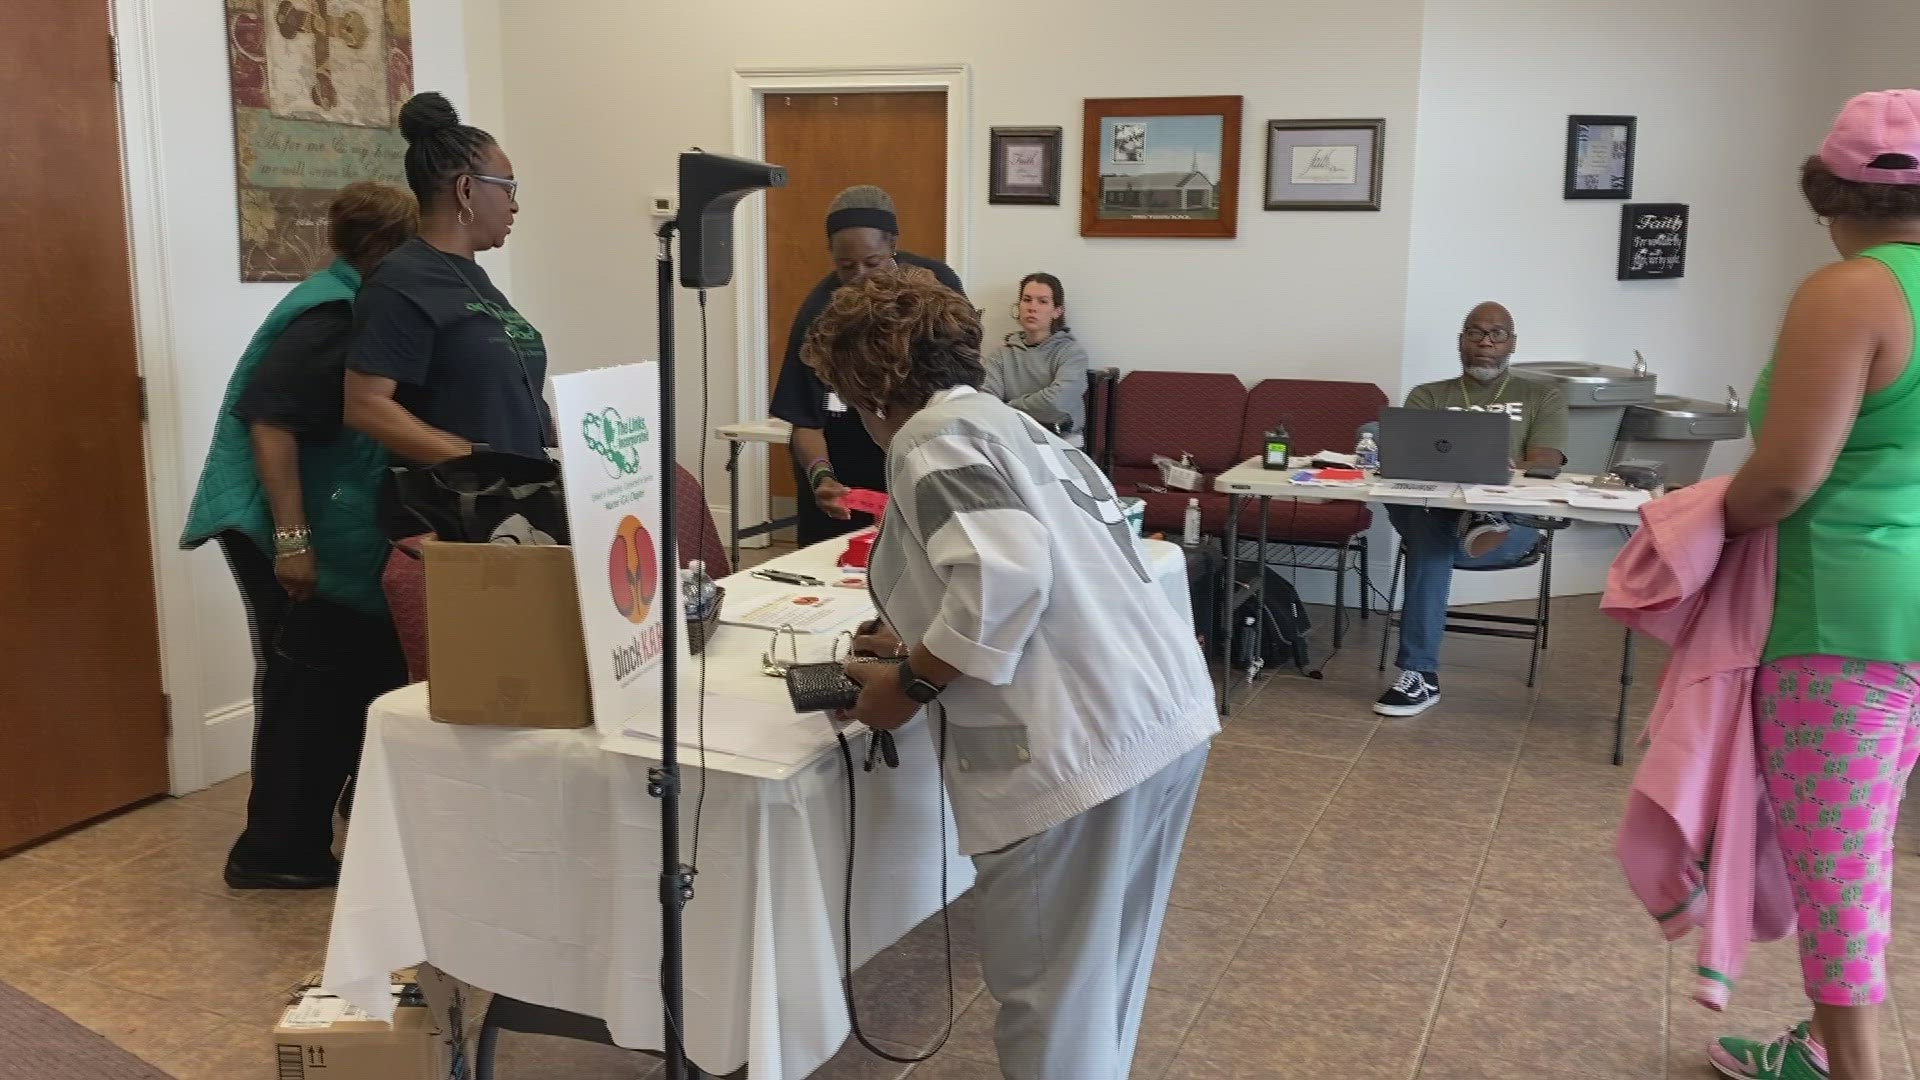 At the end of kidney awareness month, folks could come out and learn information on kidney functions and how they can stay healthy.